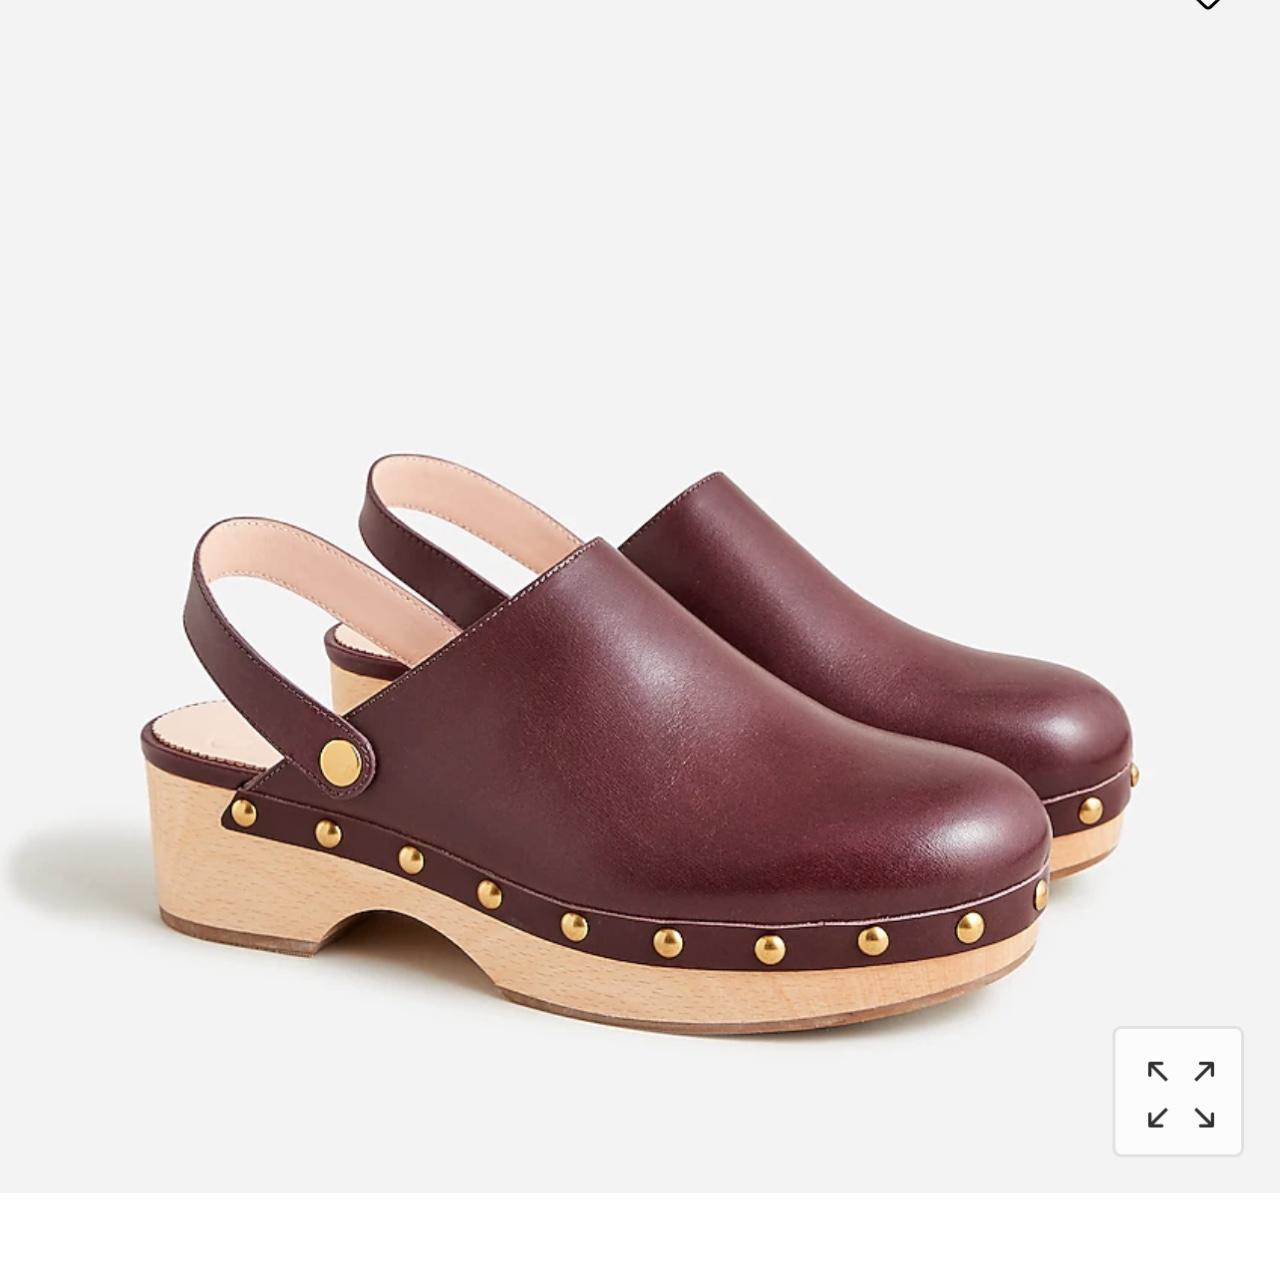 J.Crew Women's Brown and Burgundy Clogs